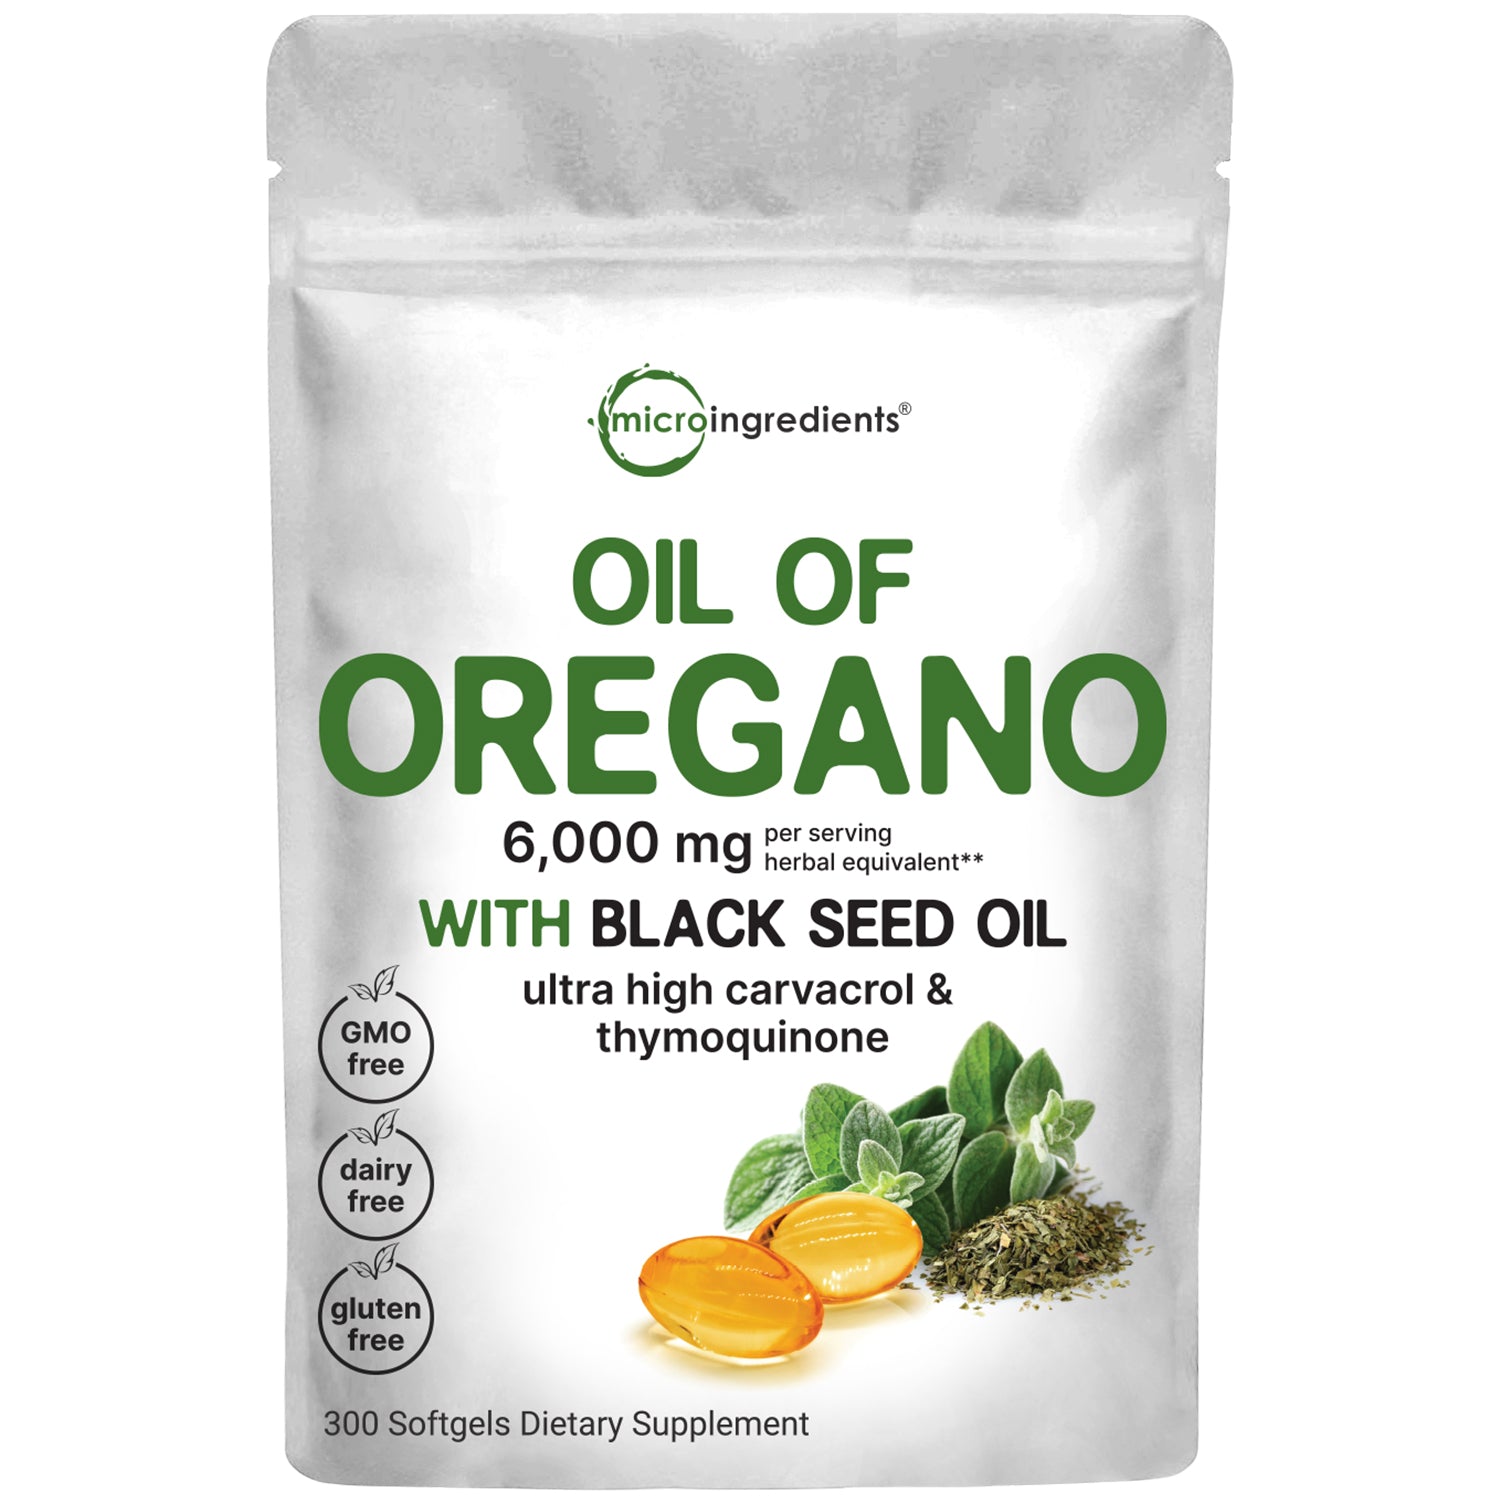 Image of Oregano Oil with Black Seed Oil, 300 softgels